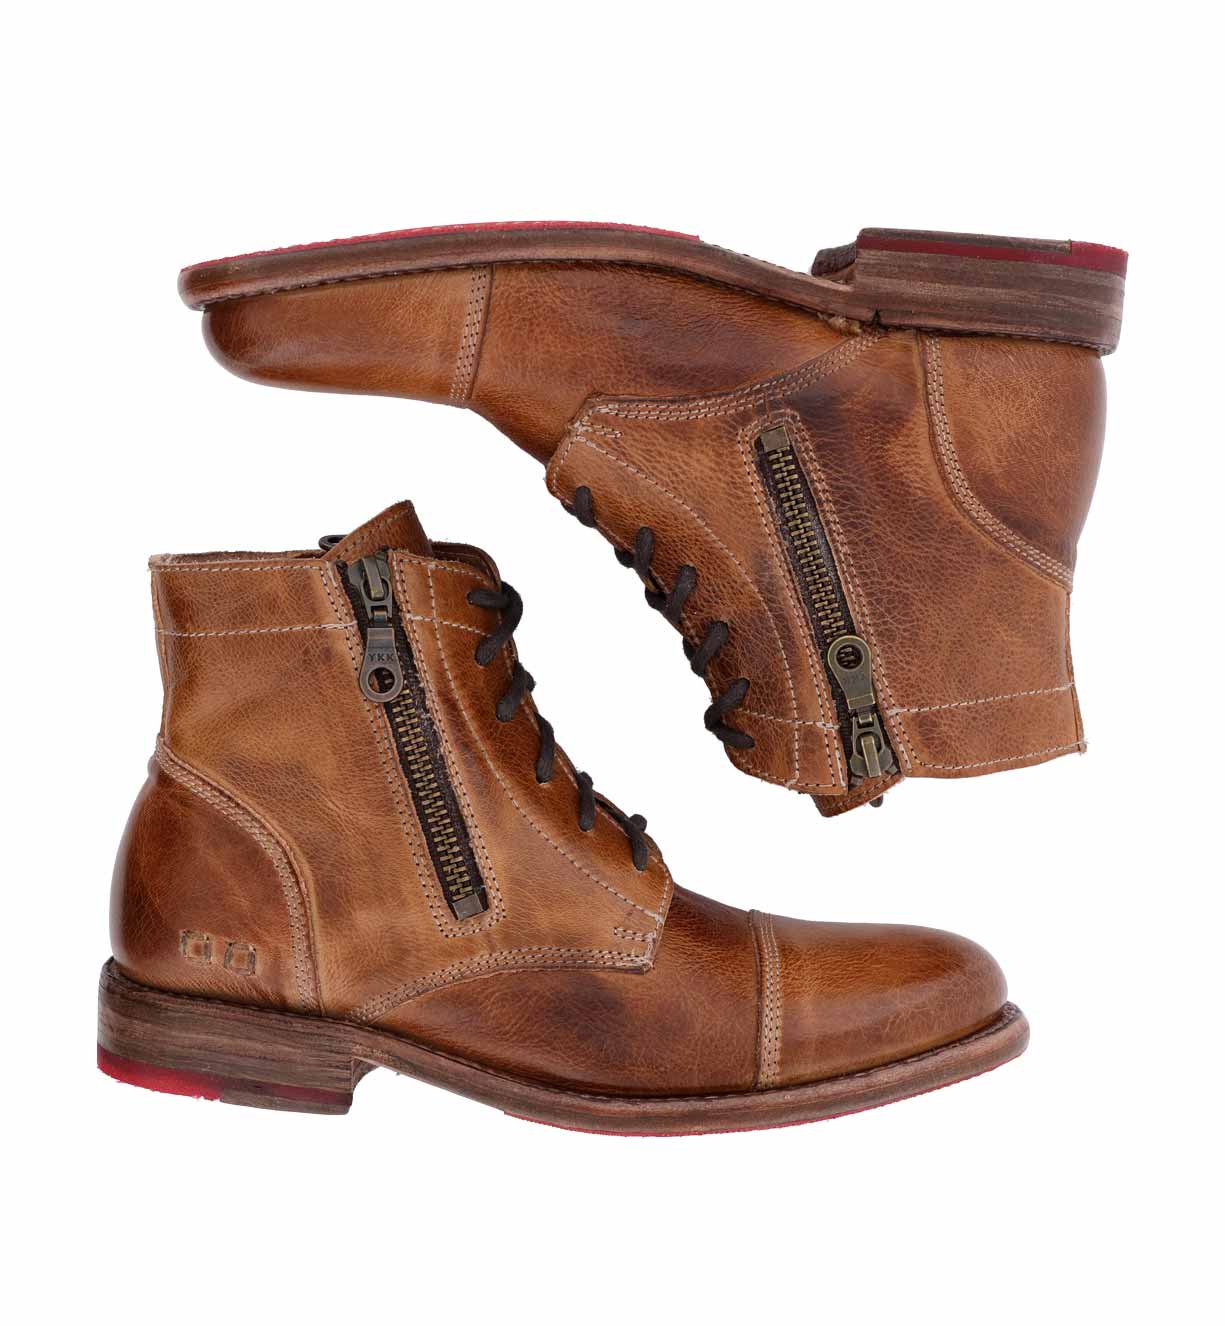 A pair of Bonnie Bed Stu enduring brown lace-up combat ankle boots with red soles.